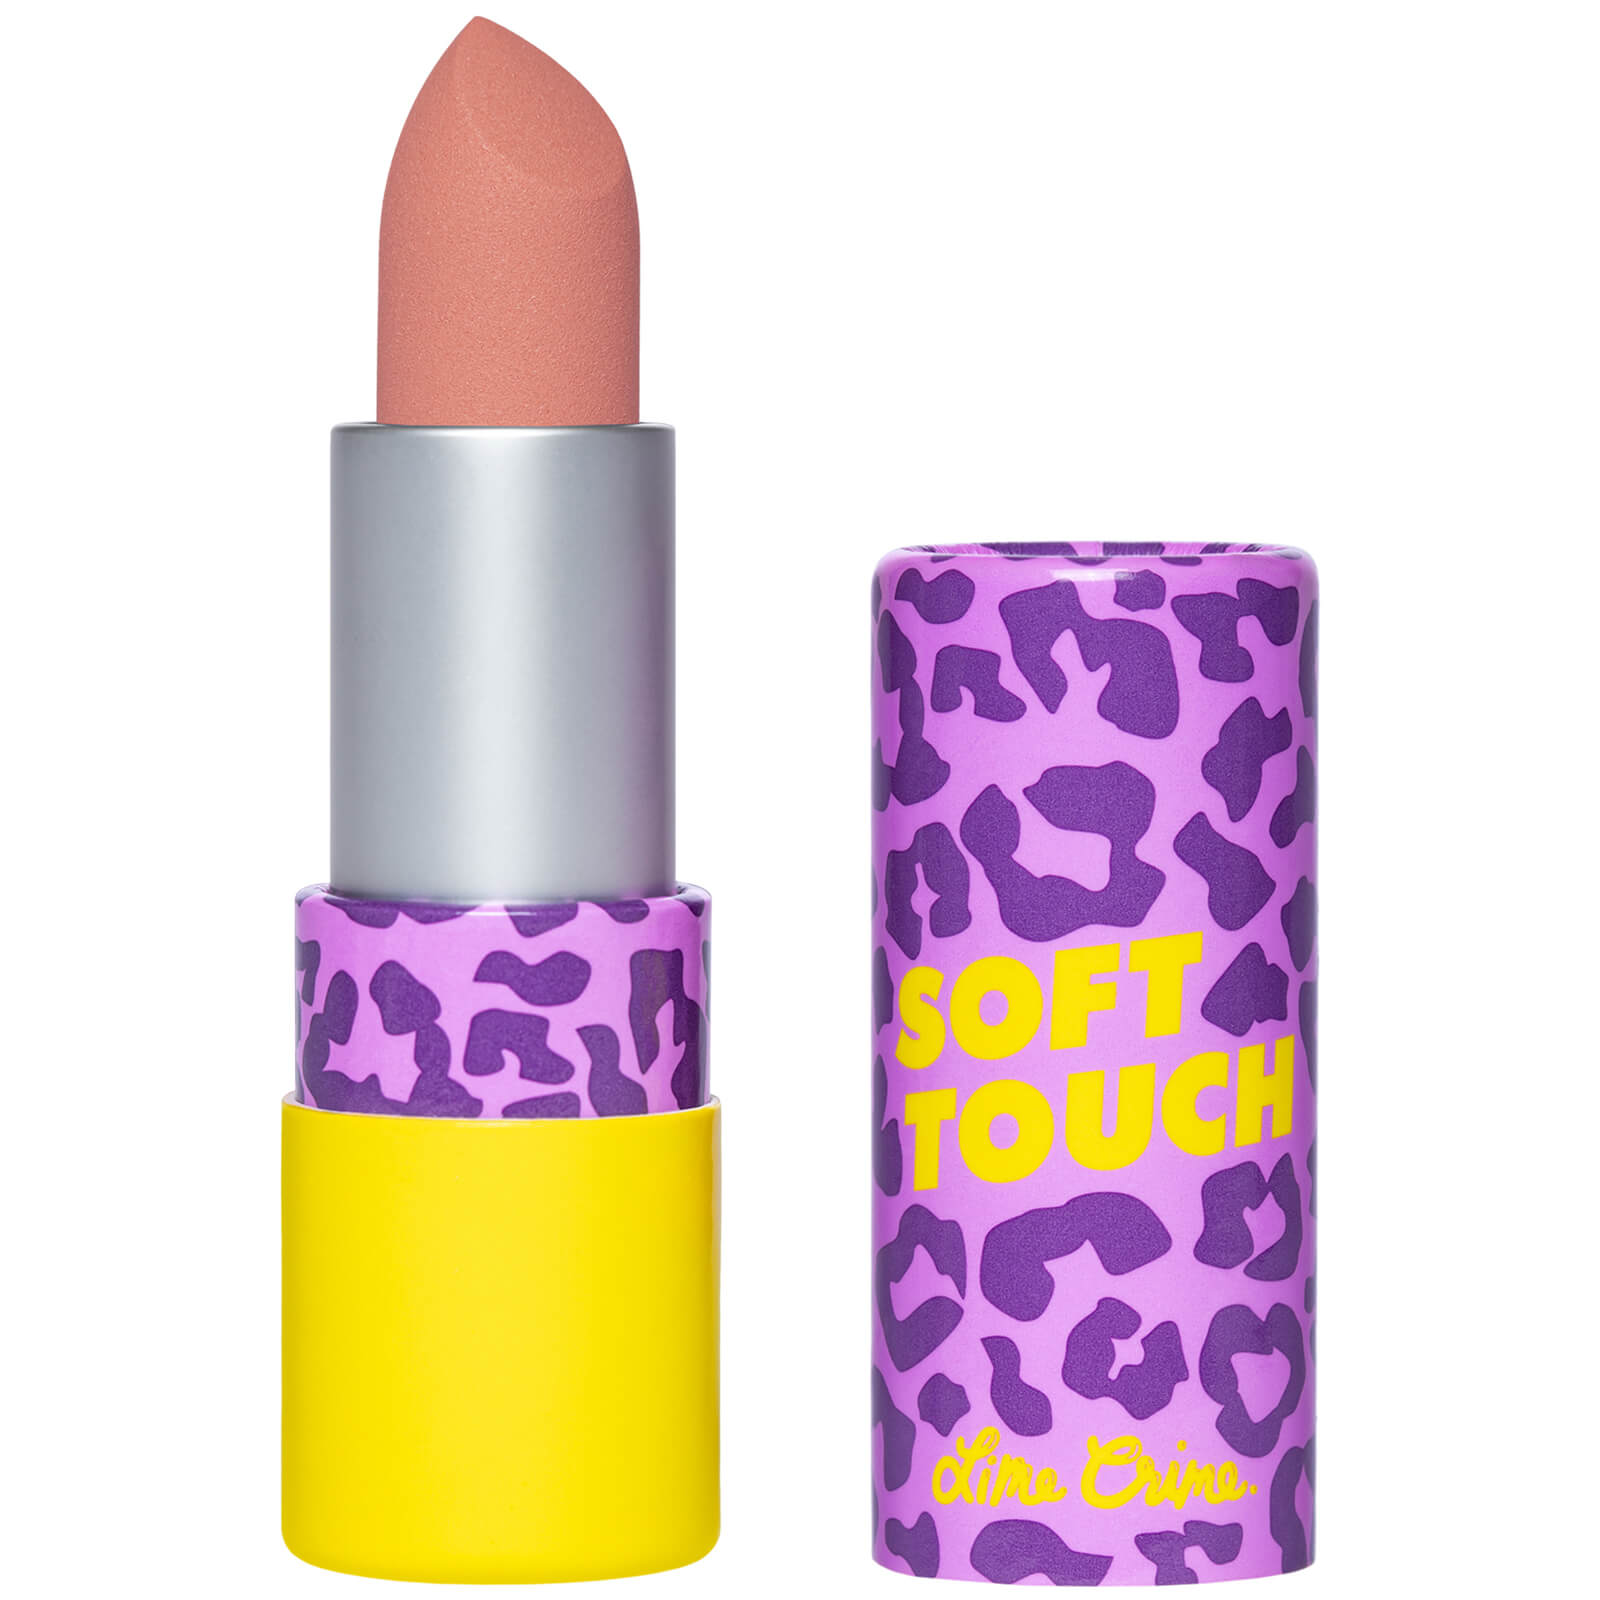 Lime Crime Soft Touch Lipstick 4.4g (Various Shades) - Stella Pink von Lime Crime